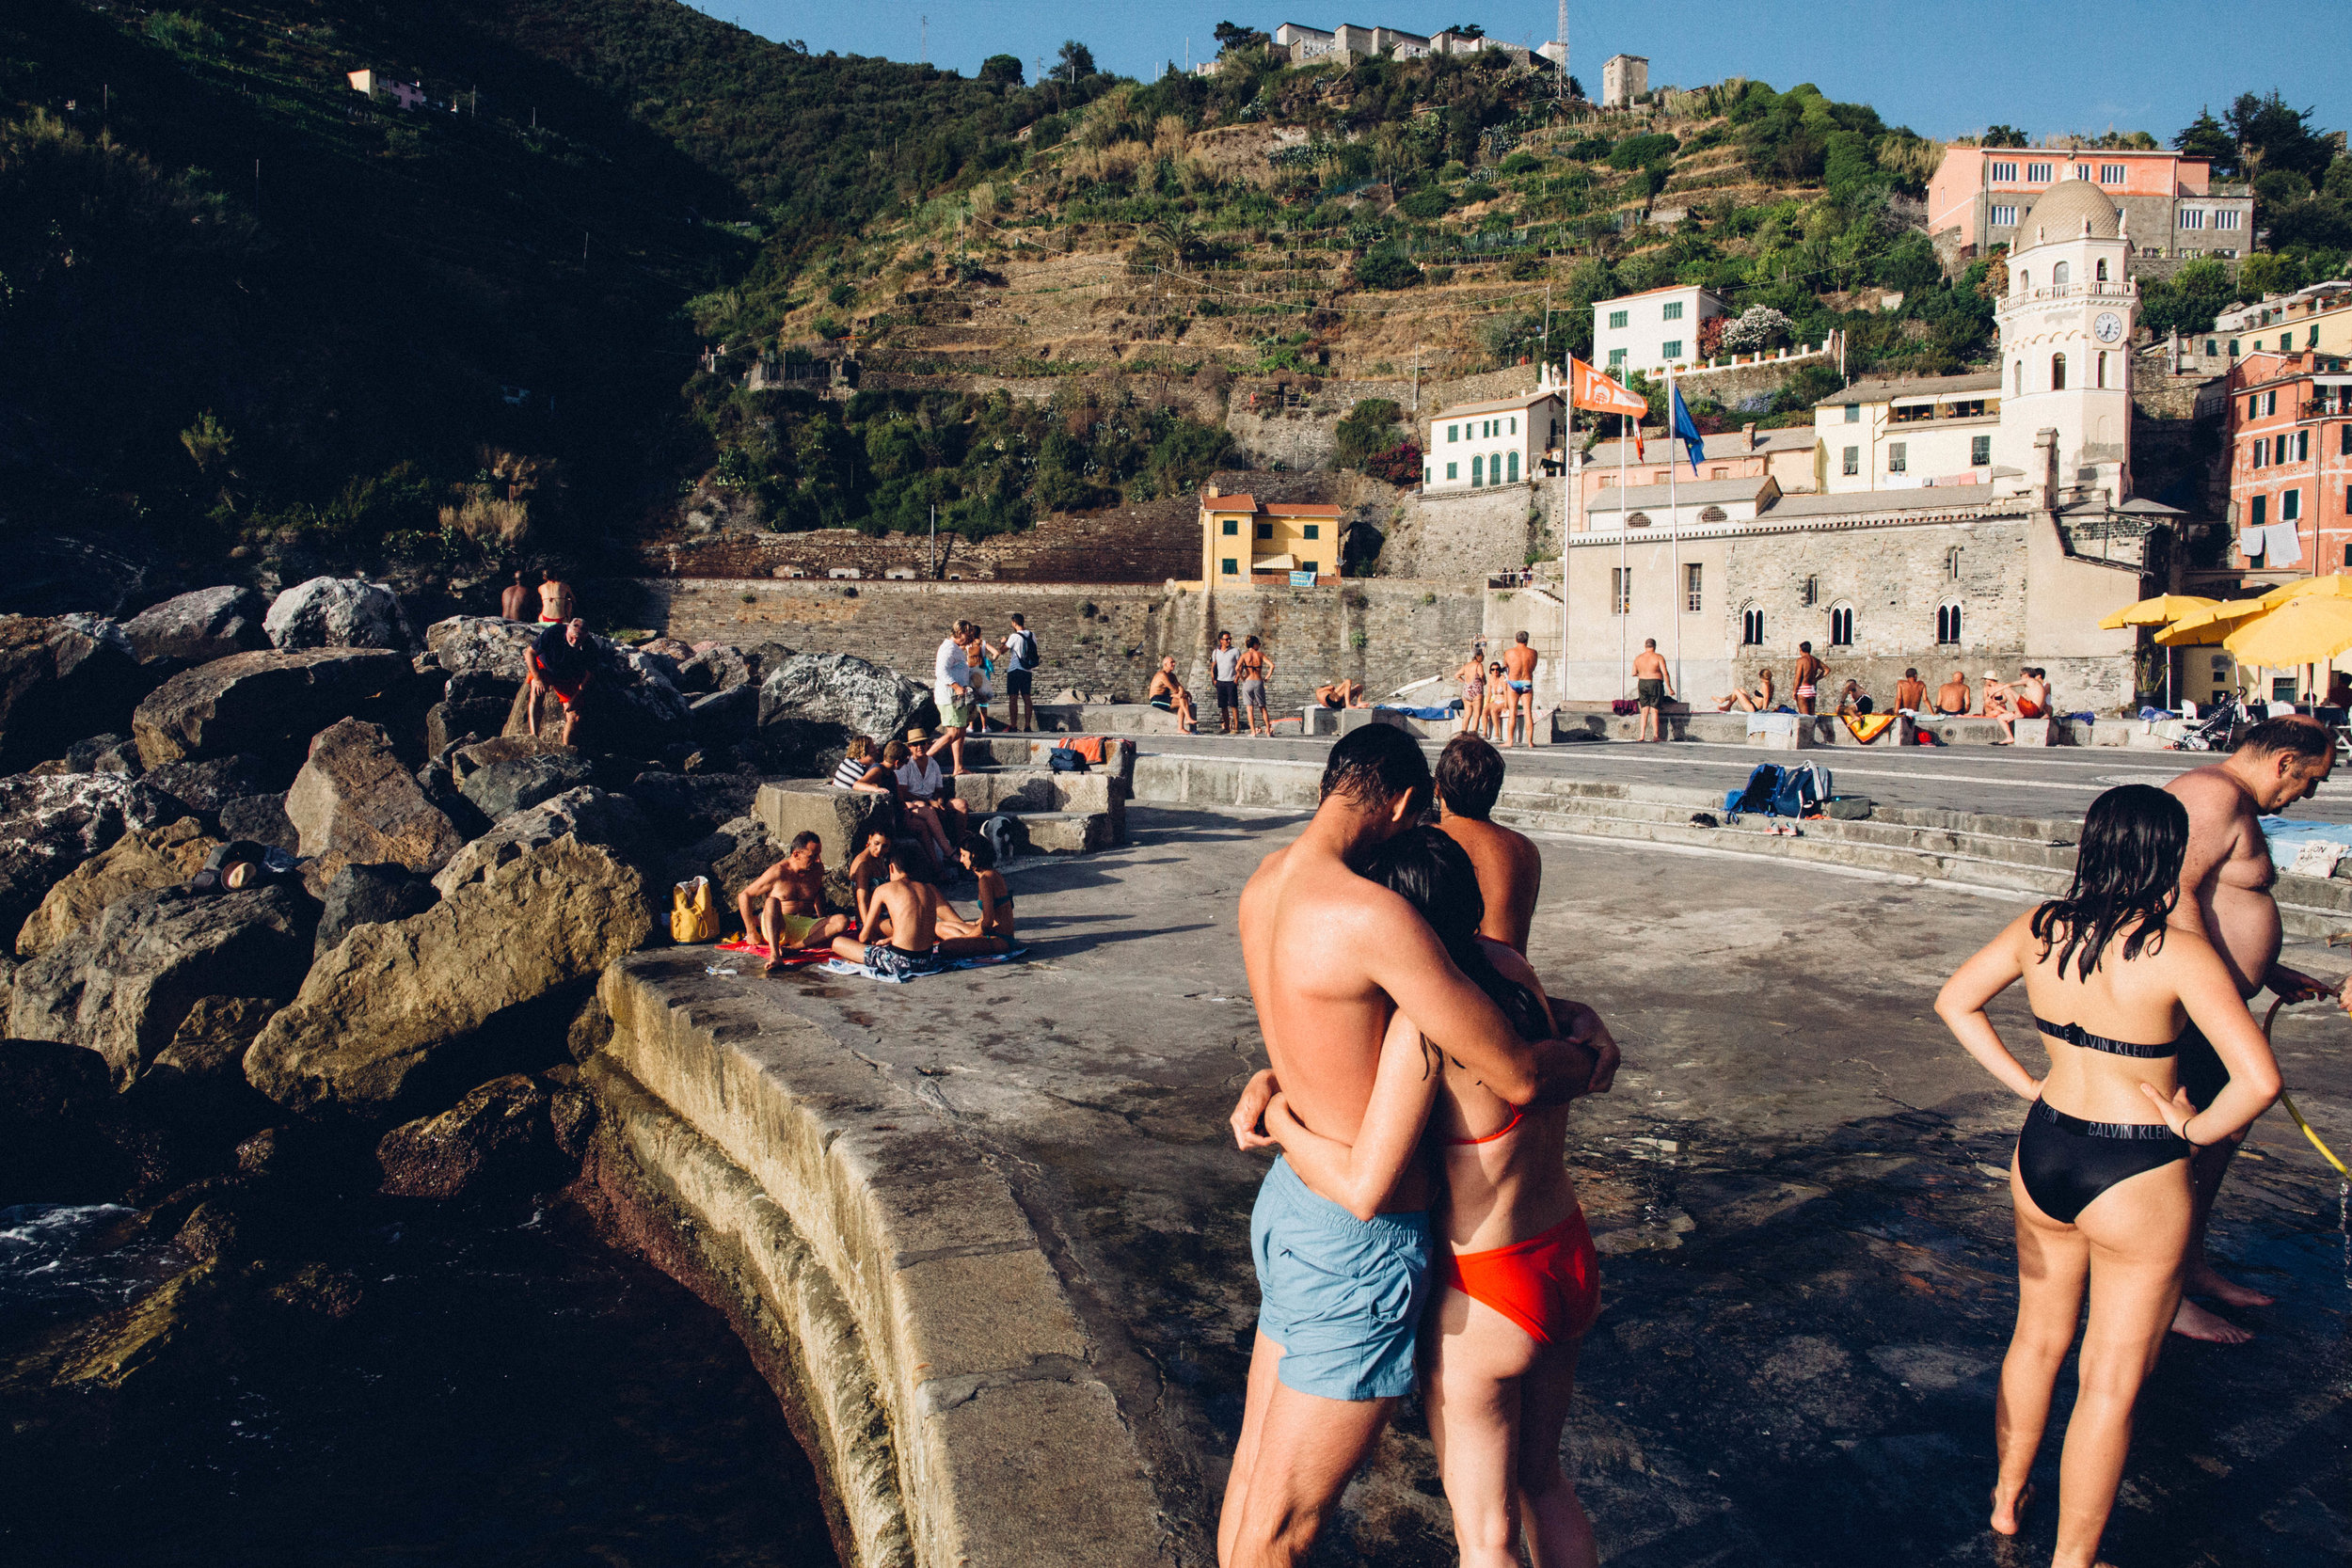   A couple embraces in Vernazza, Italy.&nbsp;  